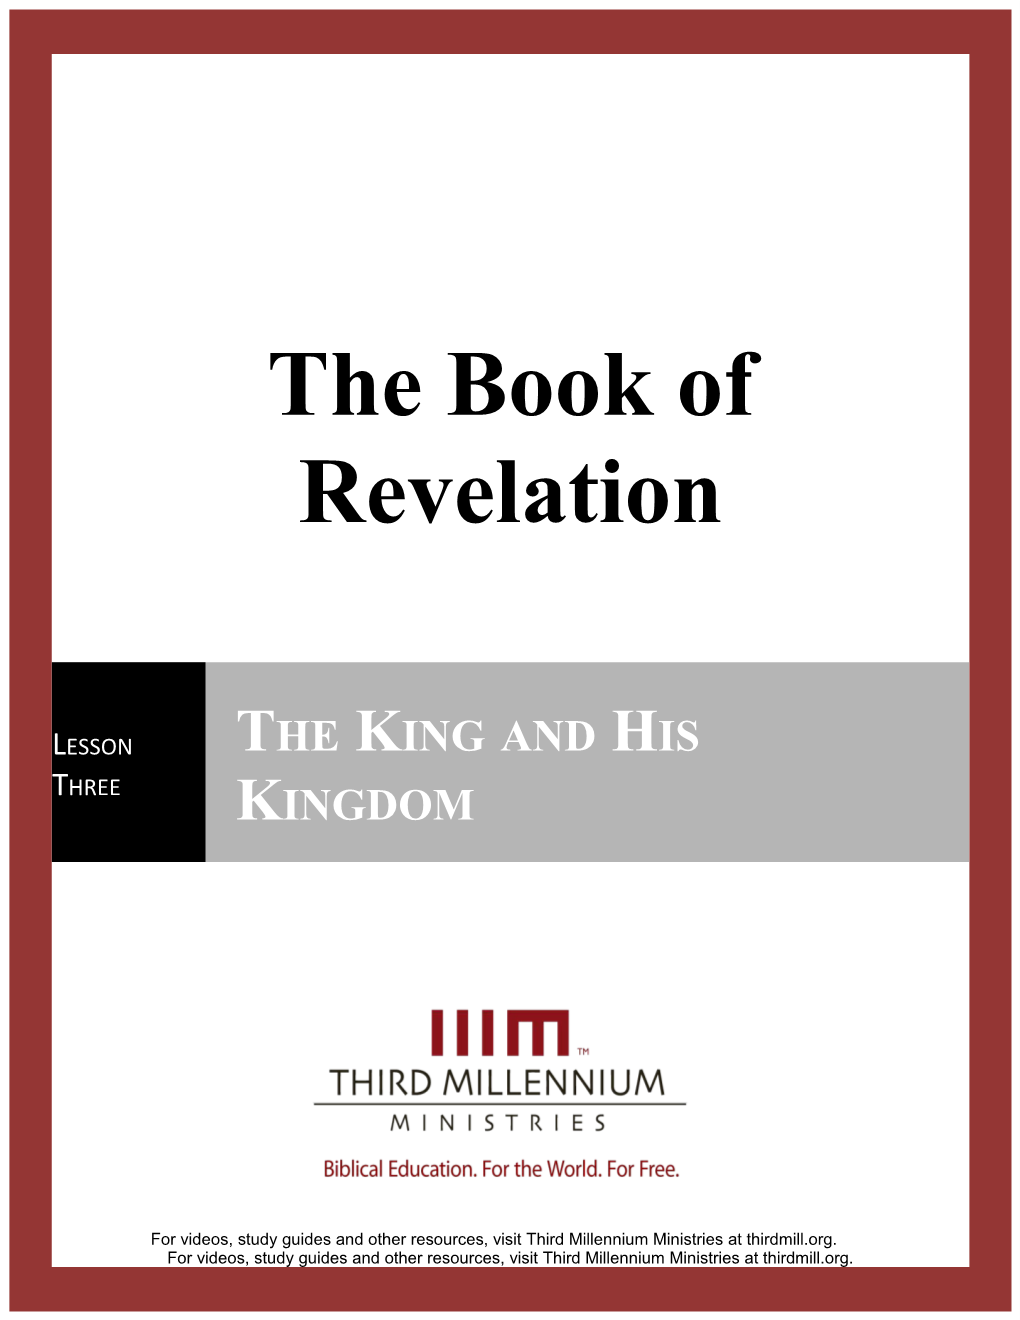 The Book of Revelation, Lesson 3